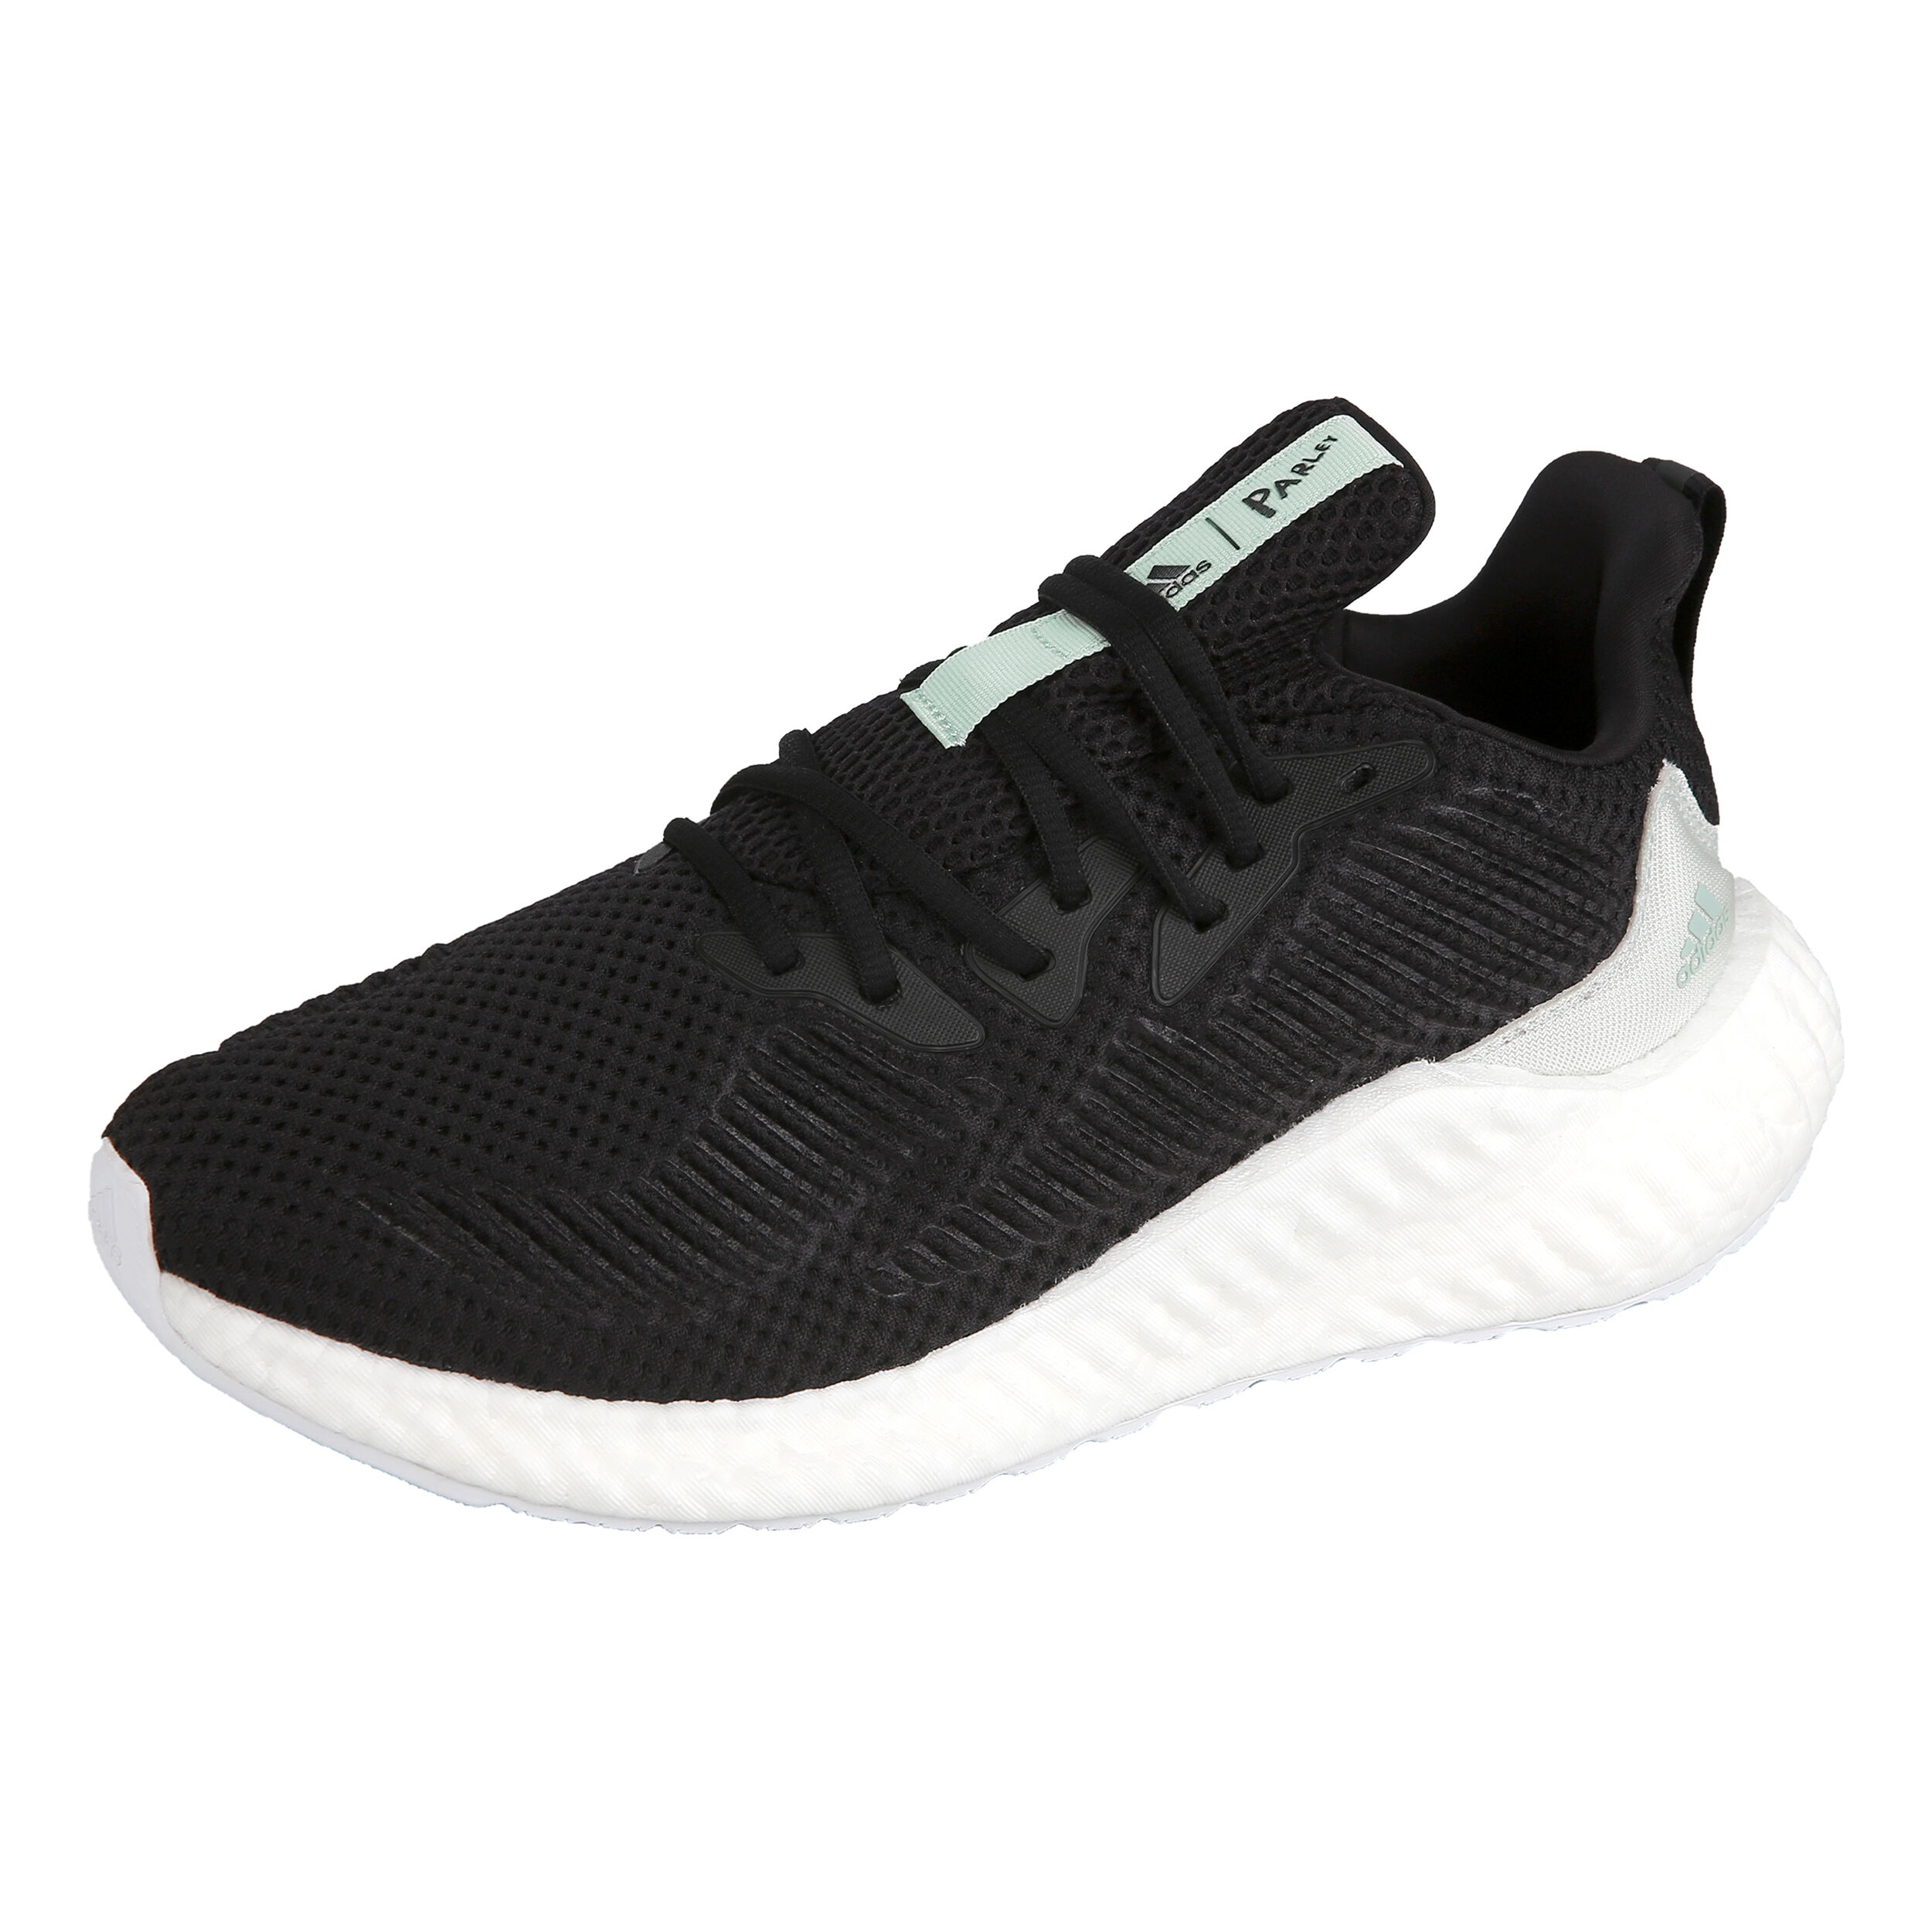 alphaboost parley shoes